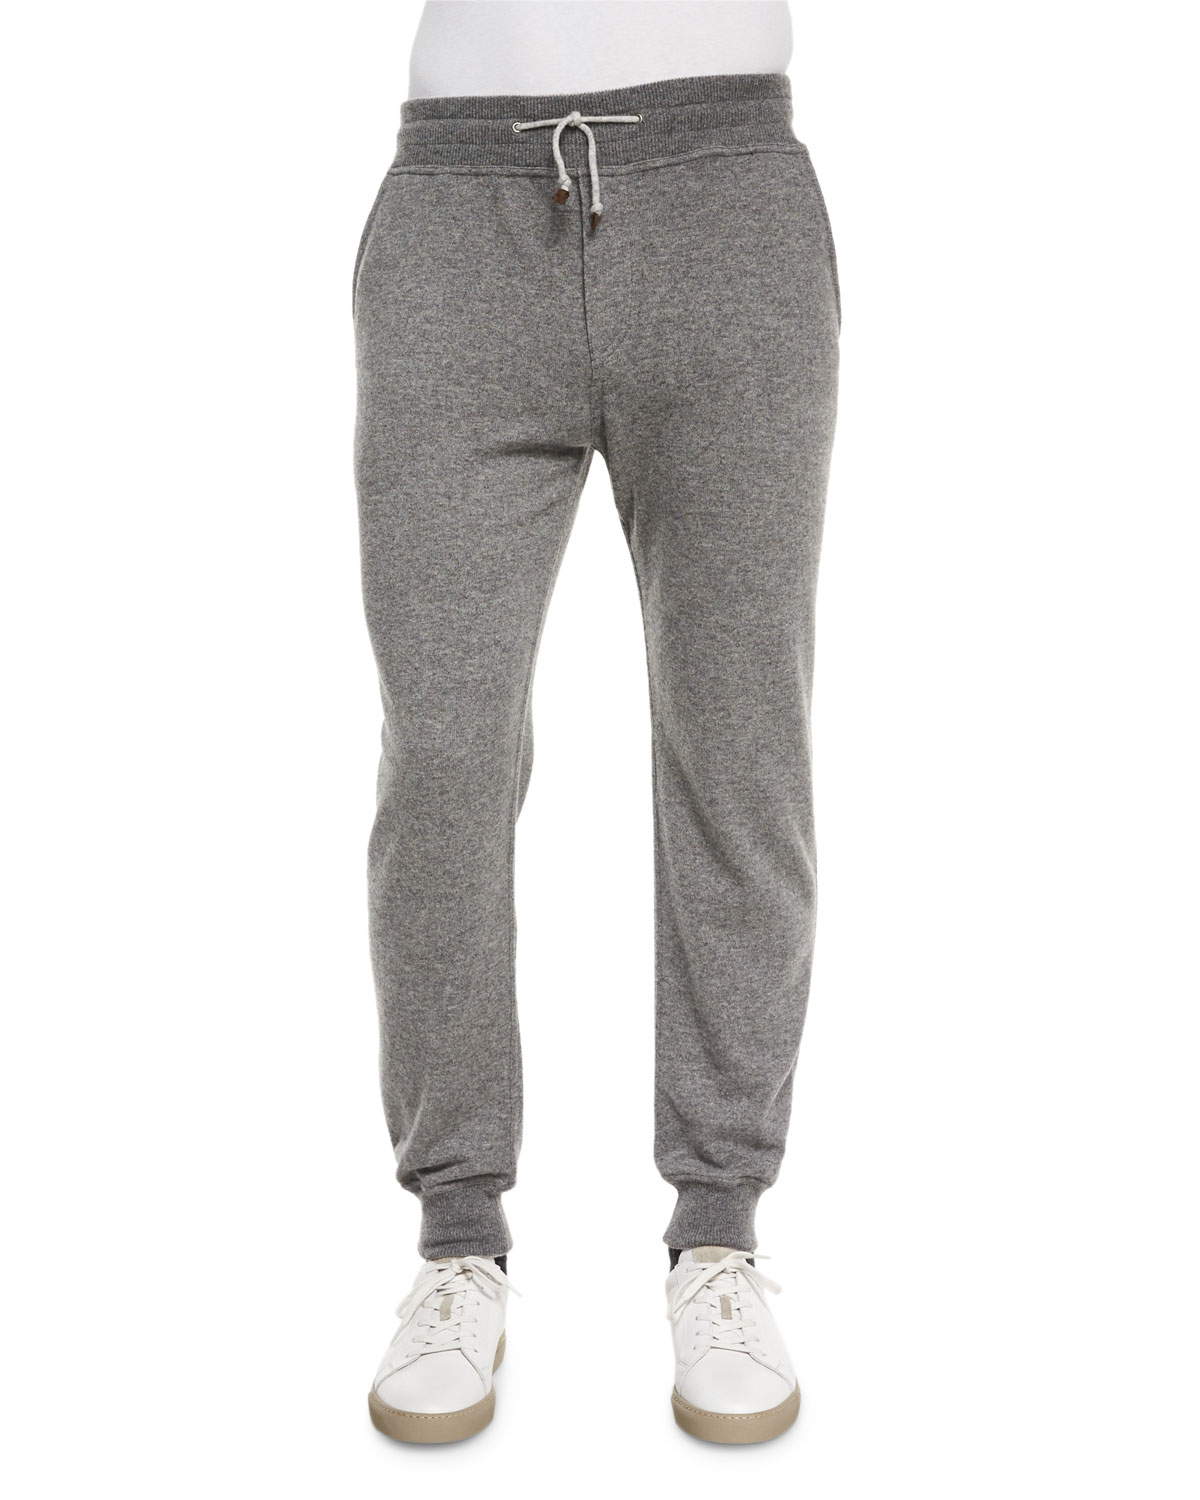 Lyst - Brunello cucinelli Cashmere Knit Jogger Pants in Gray for Men